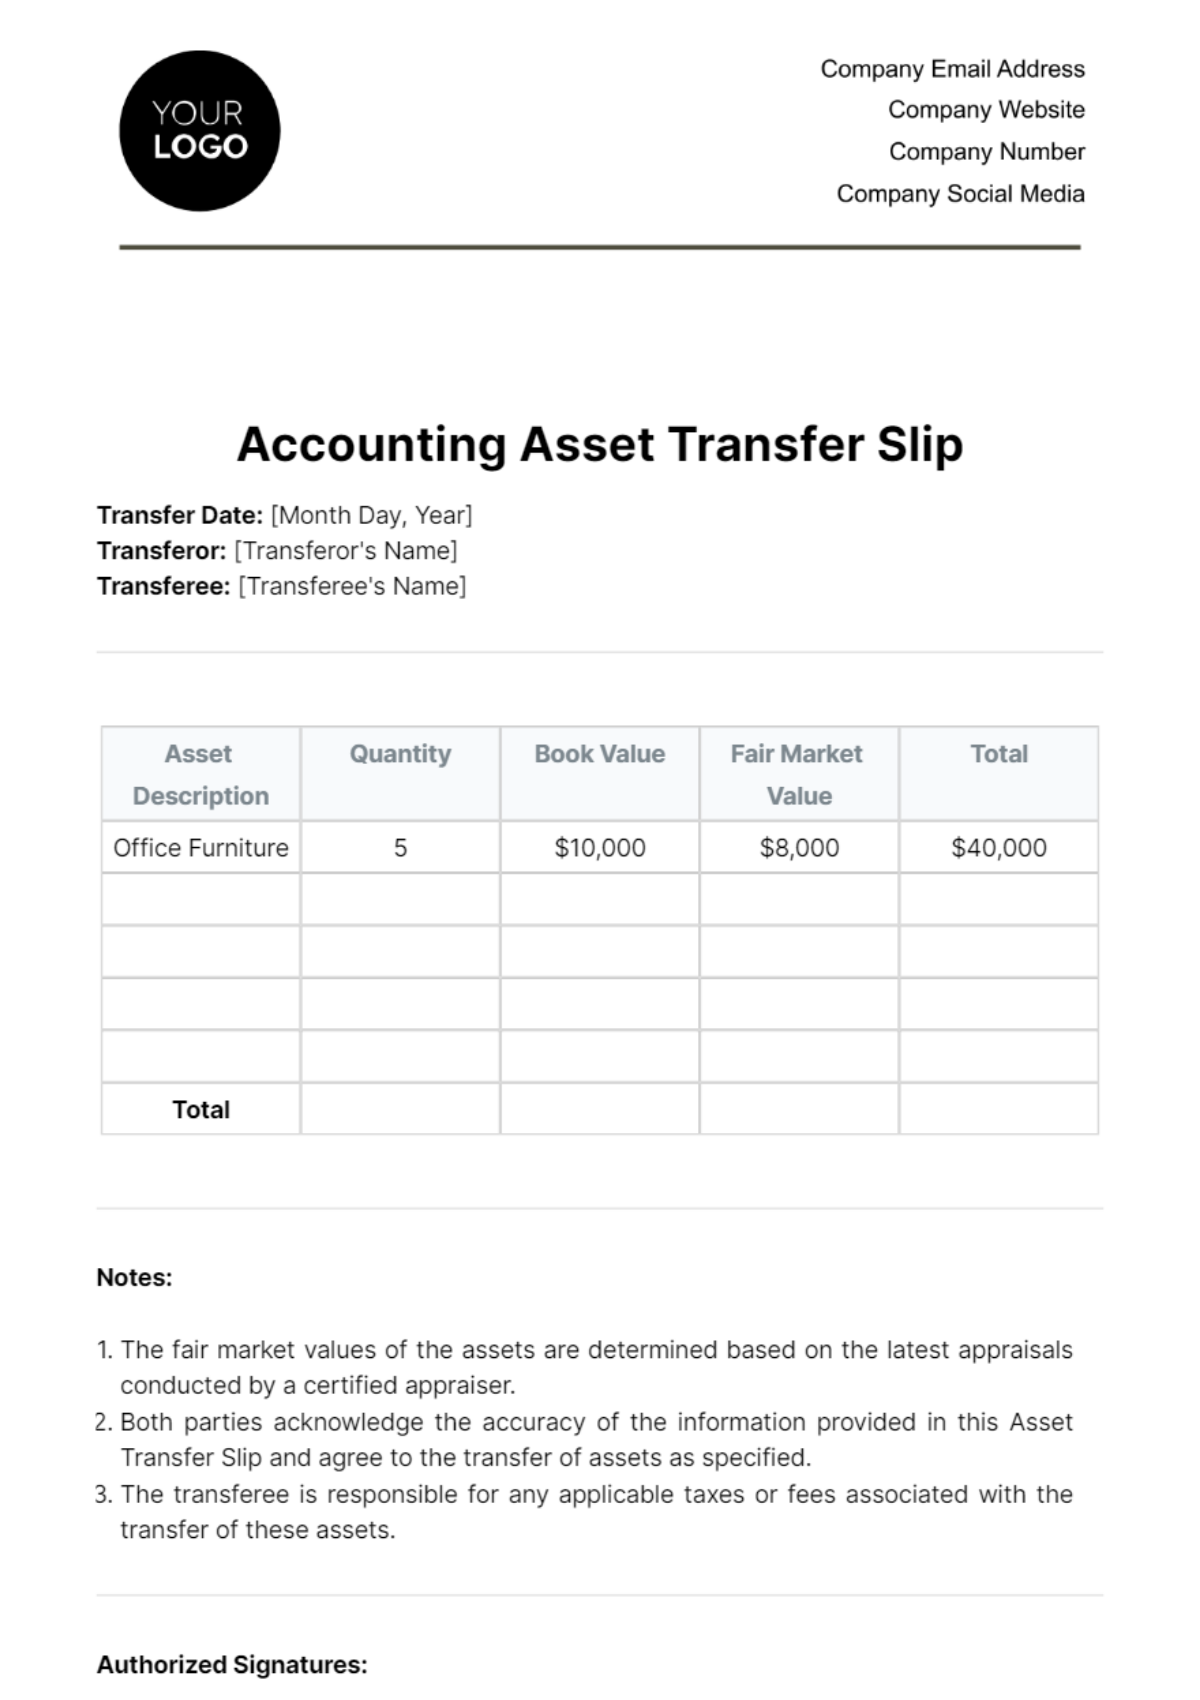 Accounting Asset Transfer Slip Template